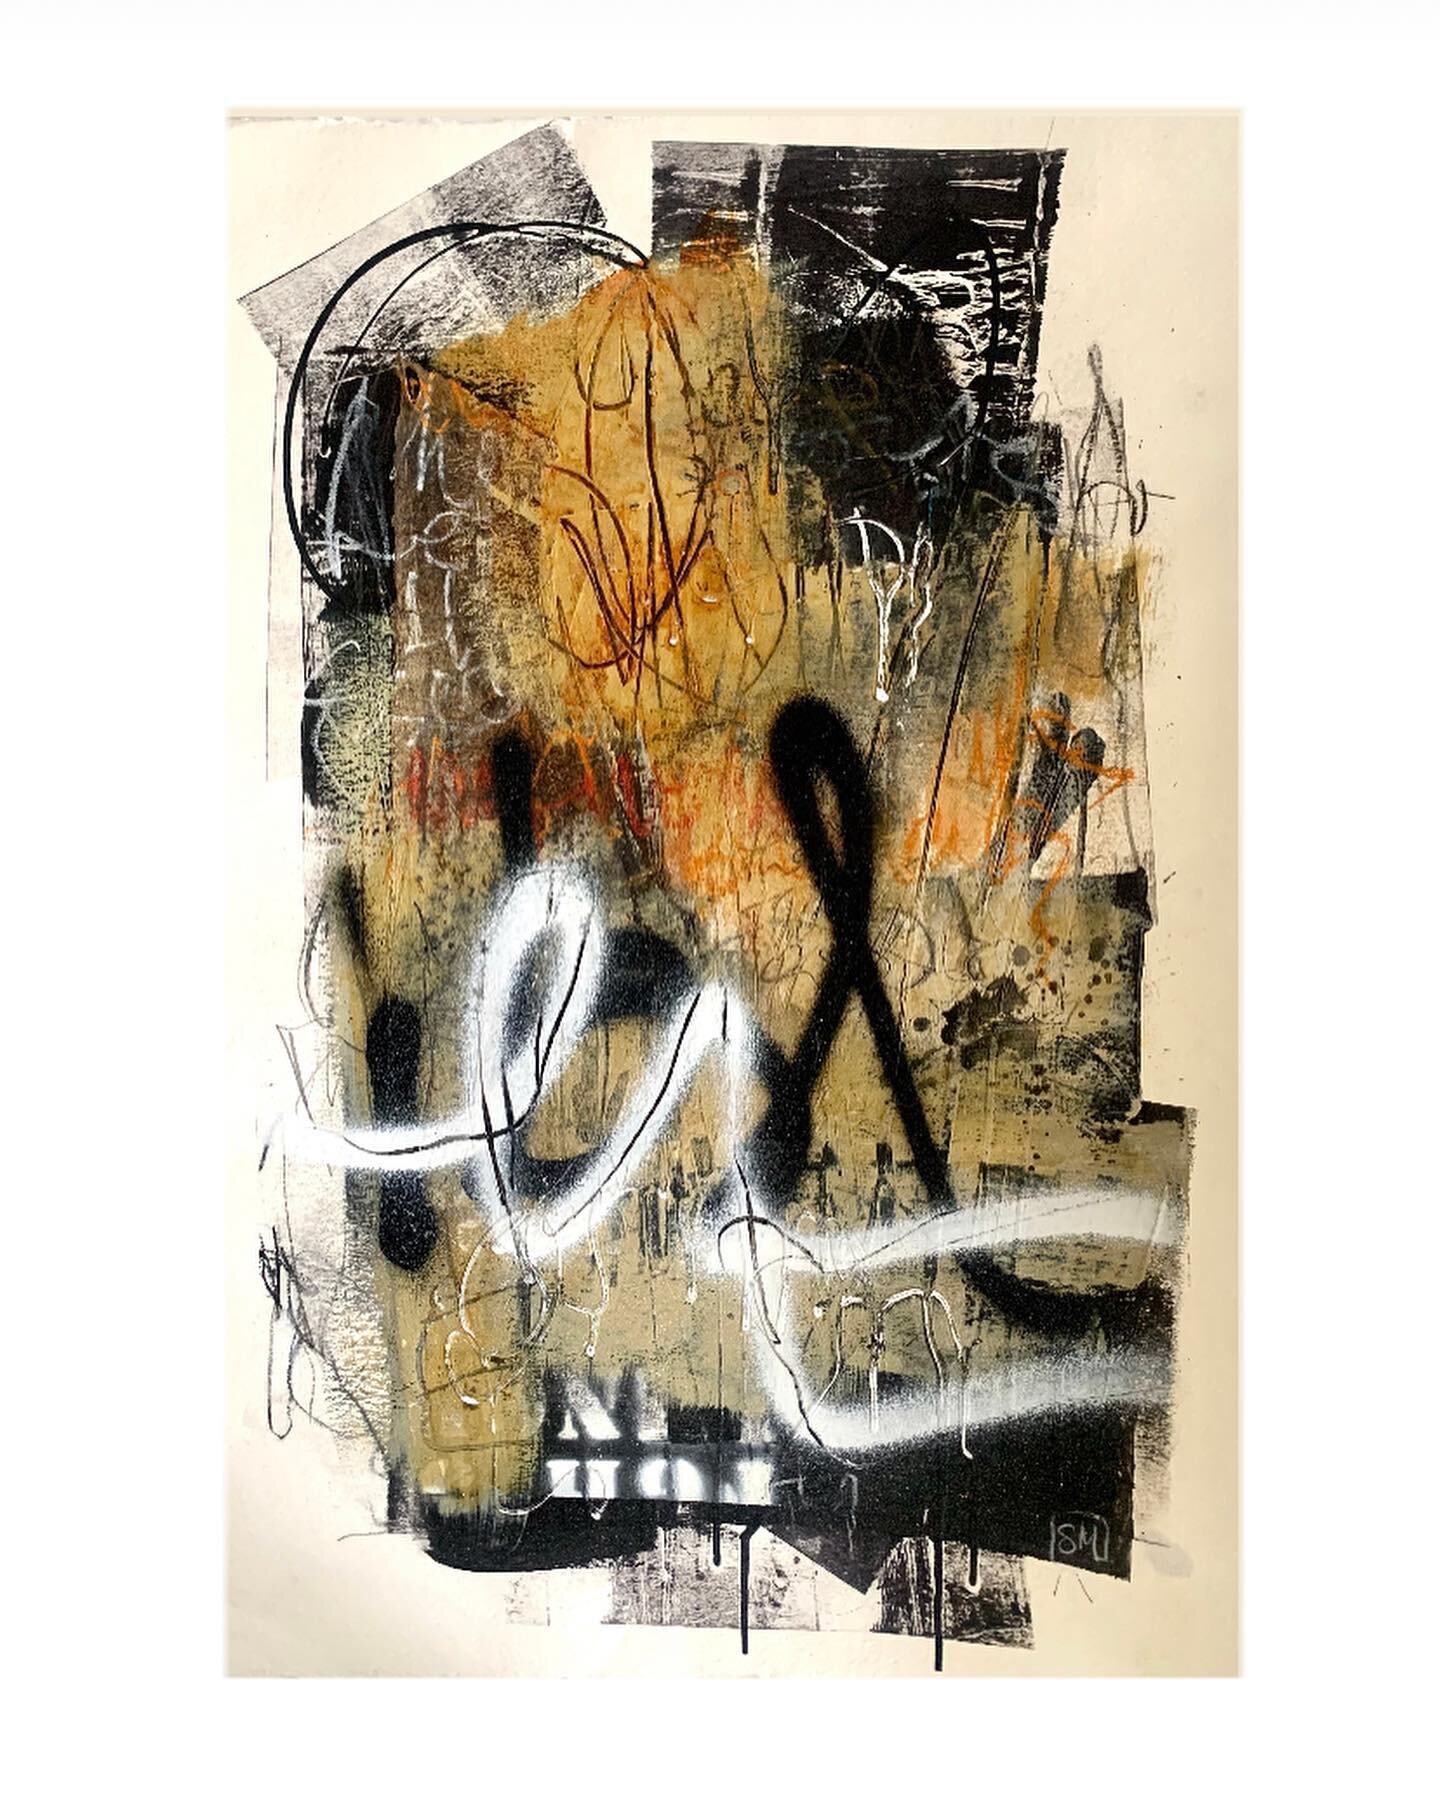 Back to Square 1 and 2 mixed media on paper. Each piece is 15&rdquo; x 23&rdquo; (unframed). DM pricing details!
.
.
.
#interiordesign #interiordesigner #interiordecorating #artgalleriesoftoronto #art-galleries#arttoronto #localart #abstractart #mode